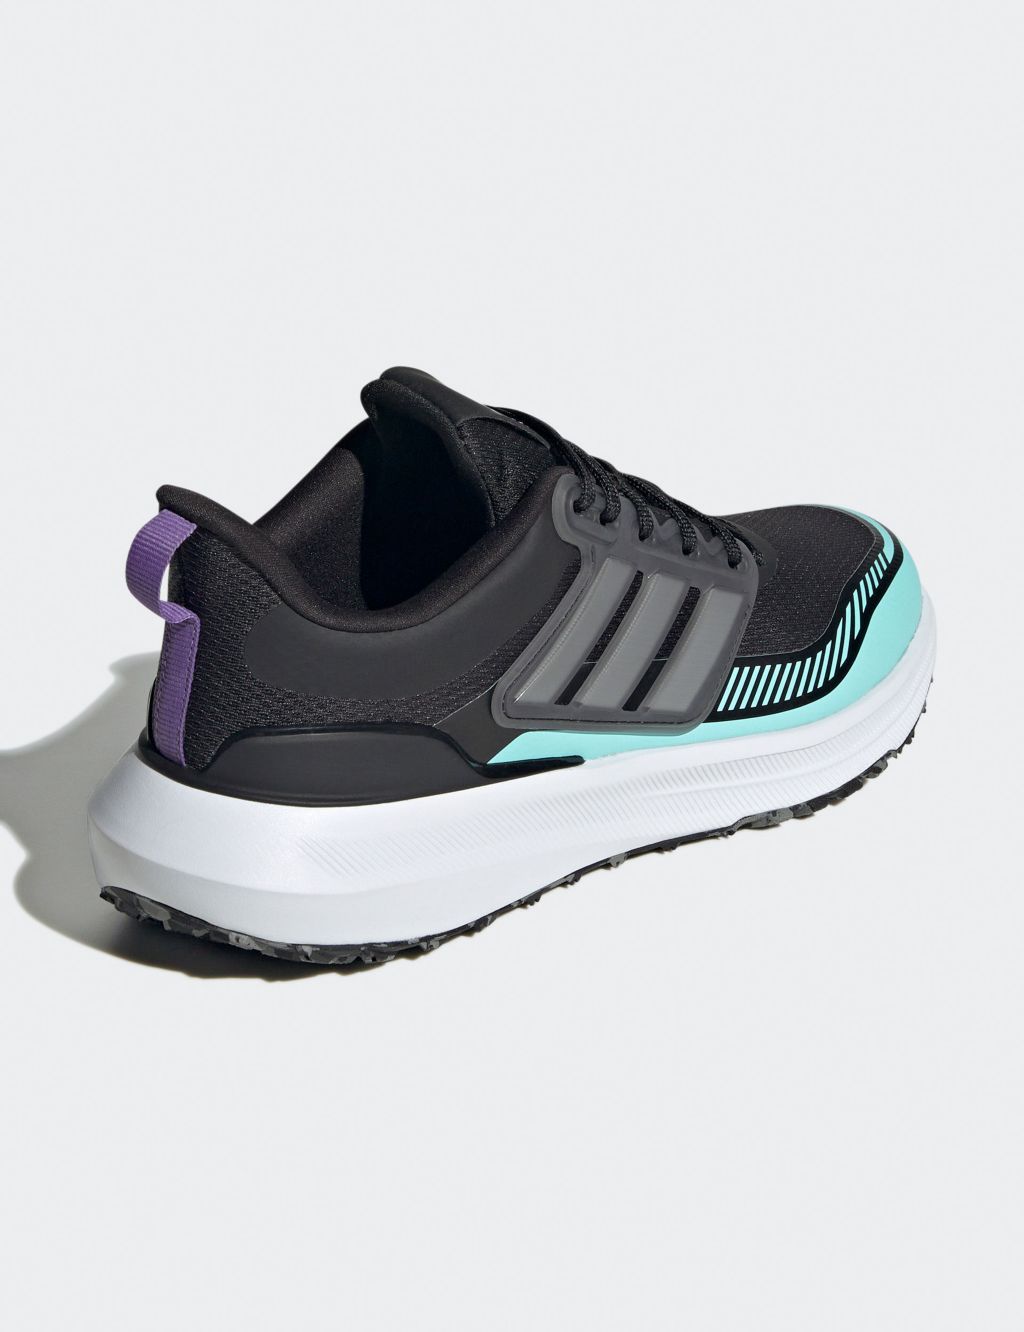 Ultrabounce Running Trainers image 3